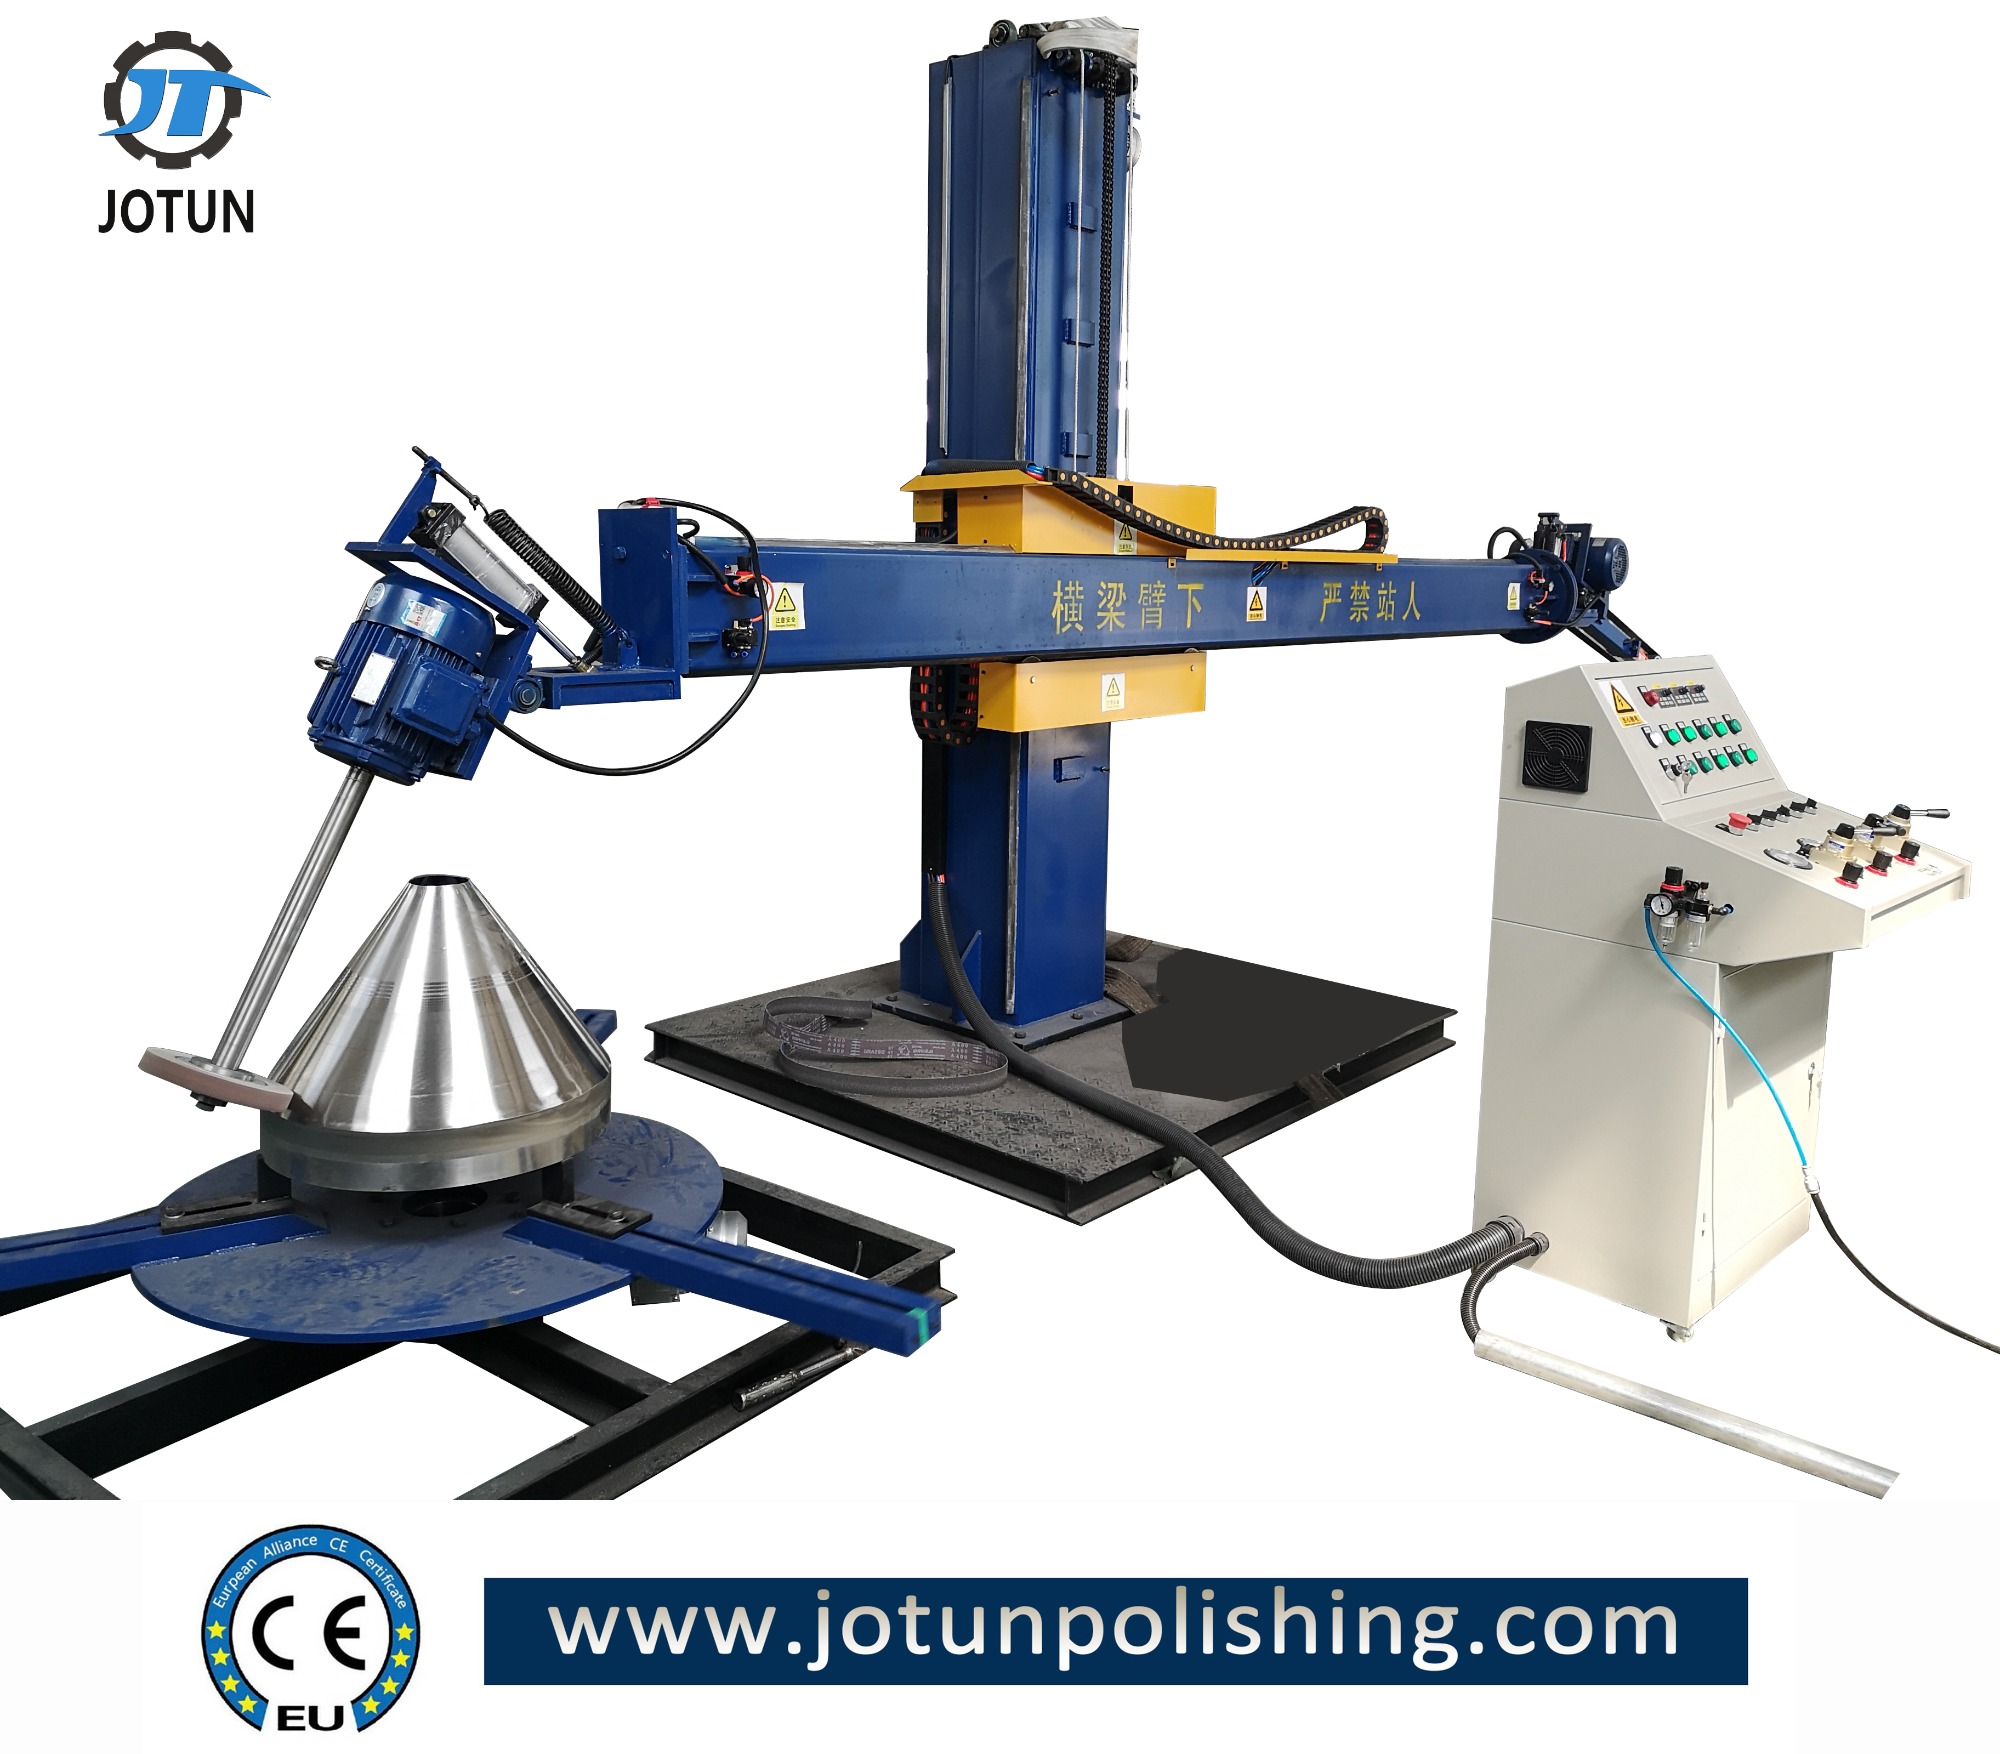 Introduction of a Chinese Polishing Machine Manufacturer